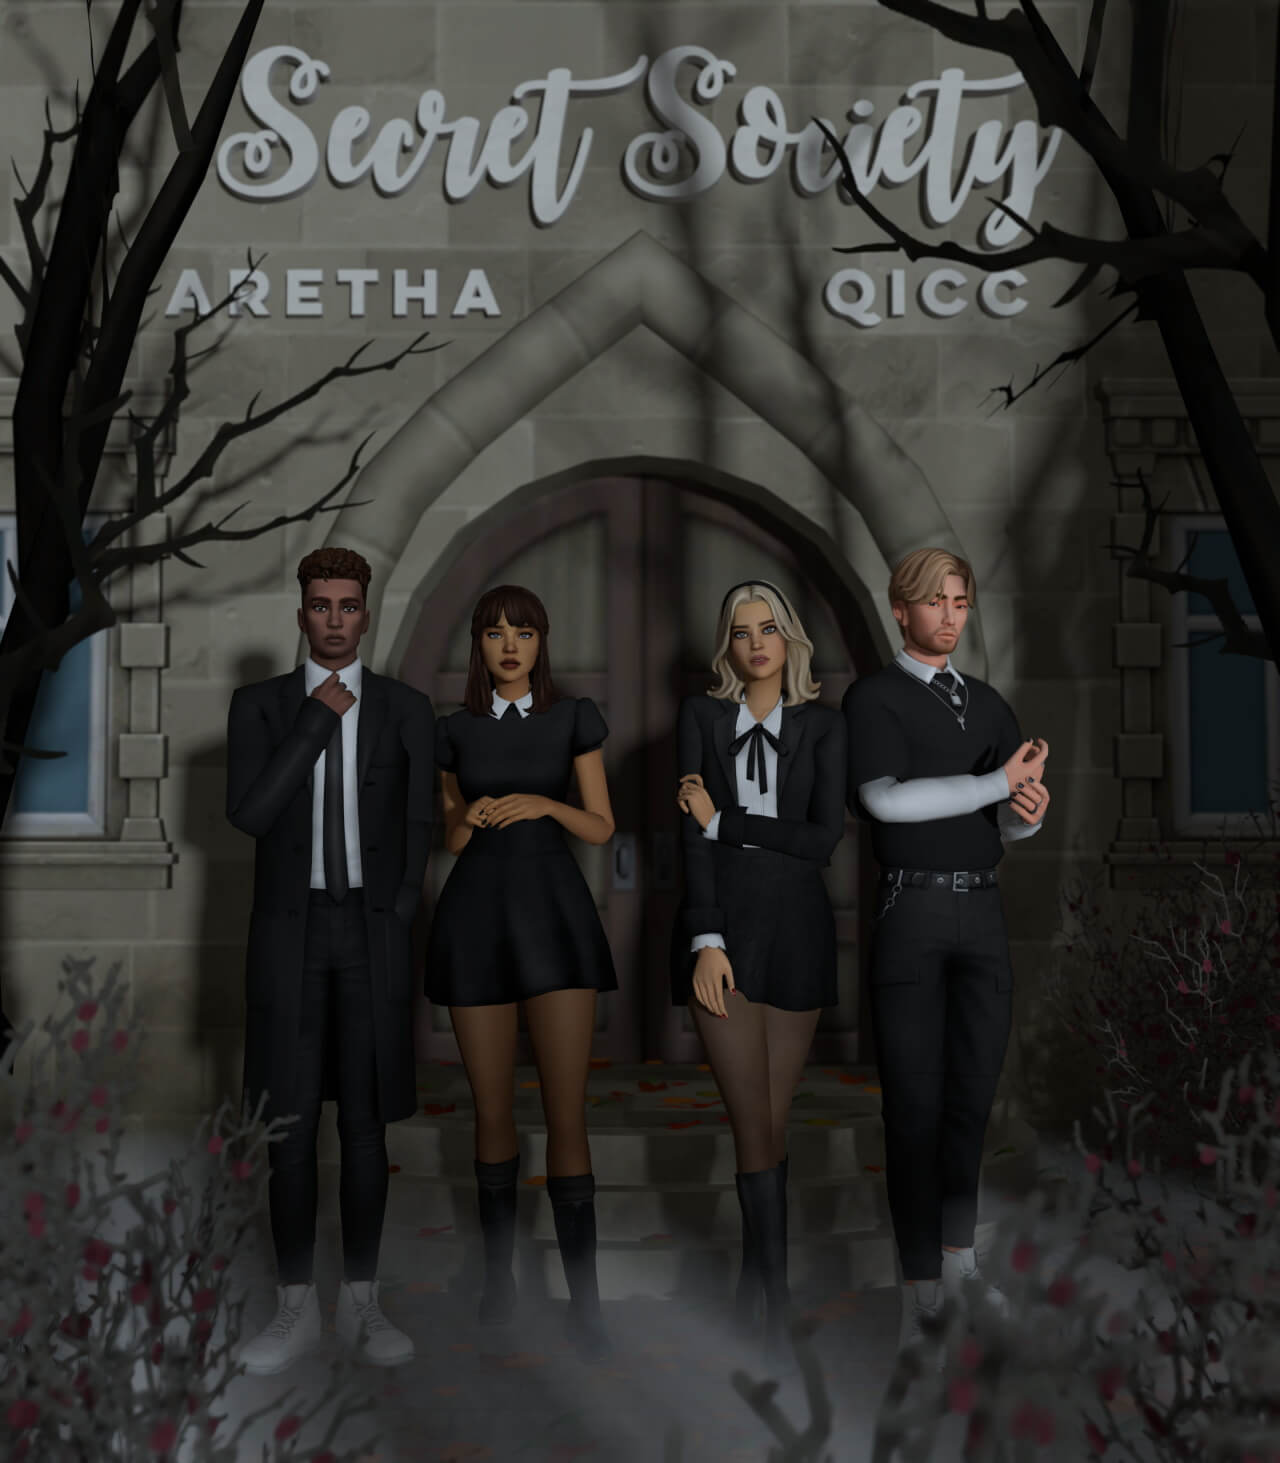 Sims 4 Secret Society Collection Aretha X Qicc The Sims Game